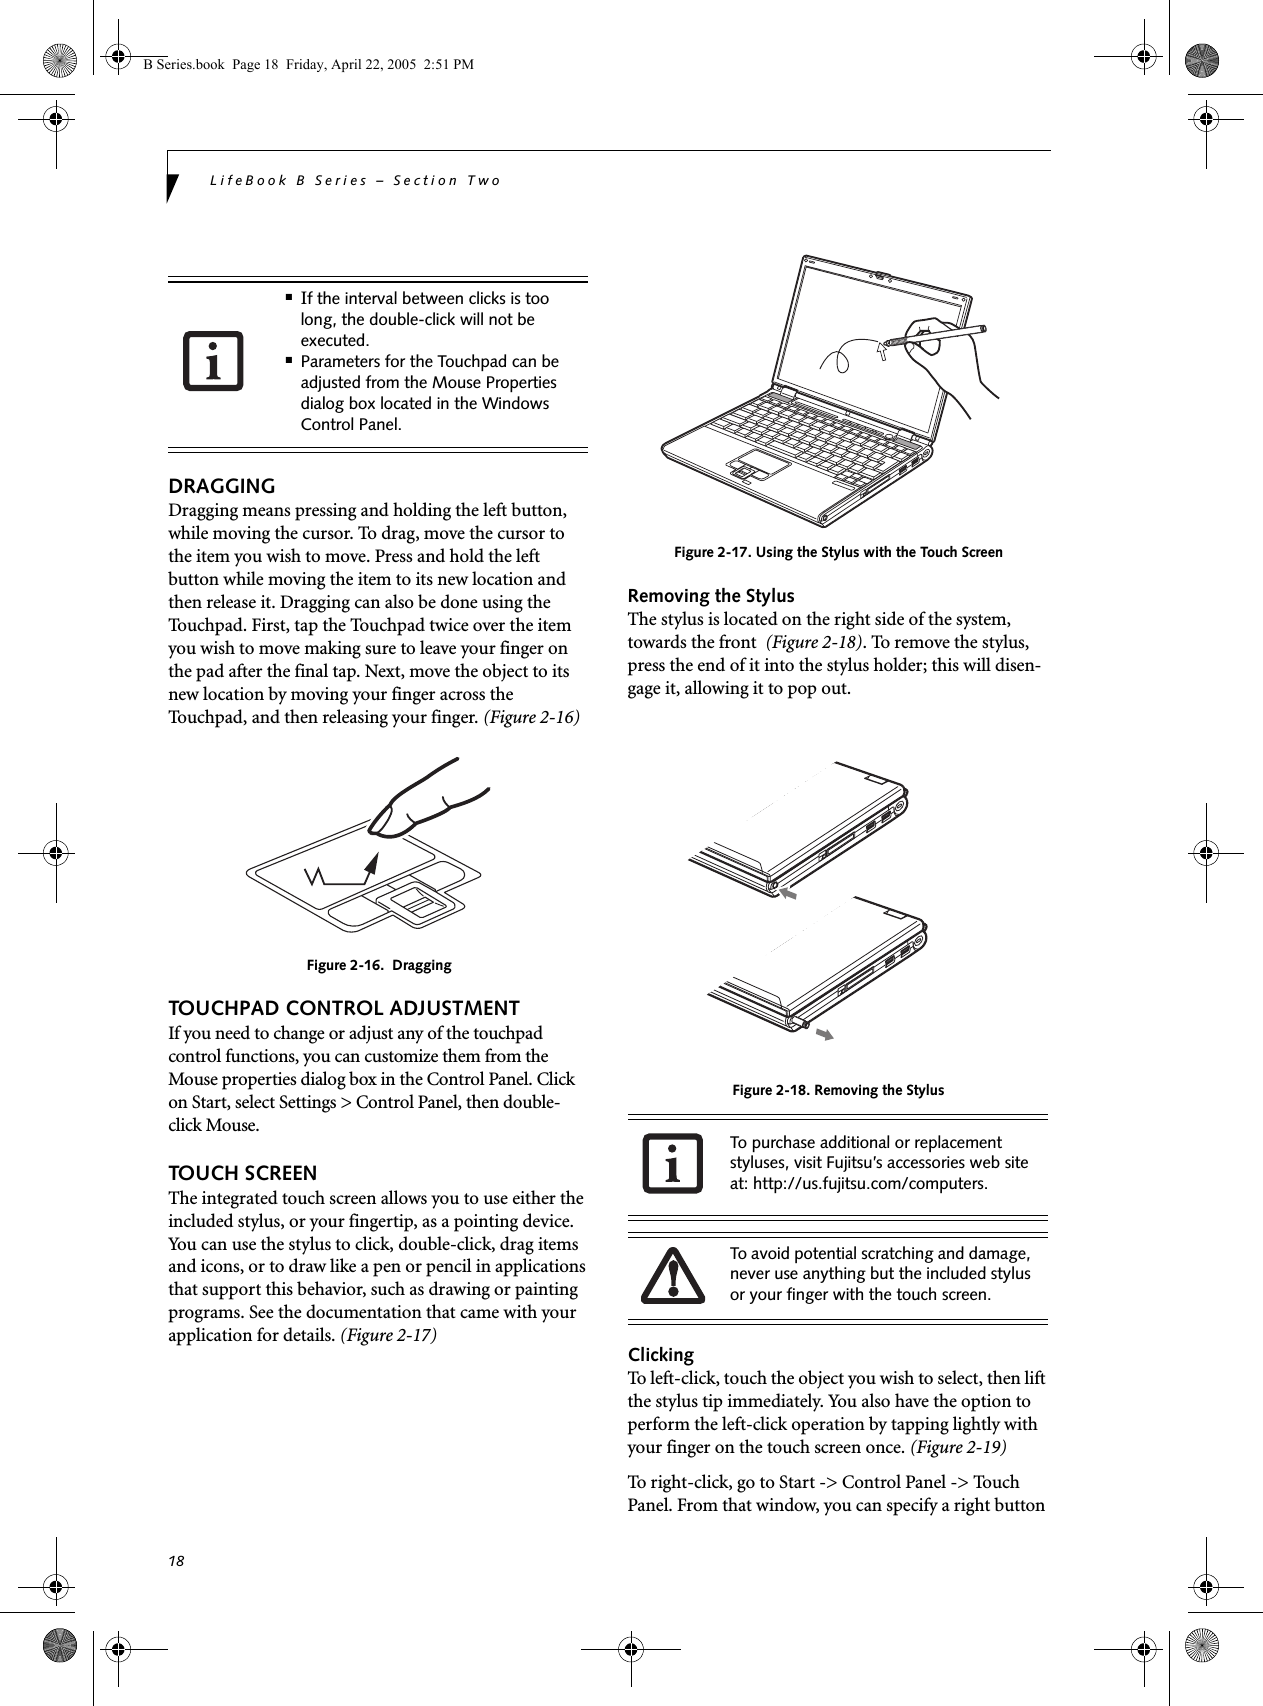 18LifeBook B Series – Section TwoDRAGGINGDragging means pressing and holding the left button, while moving the cursor. To drag, move the cursor tothe item you wish to move. Press and hold the left button while moving the item to its new location and then release it. Dragging can also be done using the Touchpad. First, tap the Touchpad twice over the item you wish to move making sure to leave your finger on the pad after the final tap. Next, move the object to its new location by moving your finger across the Touchpad, and then releasing your finger. (Figure 2-16)Figure 2-16.  DraggingTOUCHPAD CONTROL ADJUSTMENTIf you need to change or adjust any of the touchpad control functions, you can customize them from the Mouse properties dialog box in the Control Panel. Click on Start, select Settings &gt; Control Panel, then double-click Mouse. TOUCH SCREENThe integrated touch screen allows you to use either the included stylus, or your fingertip, as a pointing device. You can use the stylus to click, double-click, drag items and icons, or to draw like a pen or pencil in applications that support this behavior, such as drawing or painting programs. See the documentation that came with your application for details. (Figure 2-17)Figure 2-17. Using the Stylus with the Touch ScreenRemoving the StylusThe stylus is located on the right side of the system, towards the front  (Figure 2-18). To remove the stylus, press the end of it into the stylus holder; this will disen-gage it, allowing it to pop out.Figure 2-18. Removing the StylusClickingTo left-click, touch the object you wish to select, then lift the stylus tip immediately. You also have the option to perform the left-click operation by tapping lightly with your finger on the touch screen once. (Figure 2-19)To right-click, go to Start -&gt; Control Panel -&gt; Touch Panel. From that window, you can specify a right button ■If the interval between clicks is too long, the double-click will not be executed.■Parameters for the Touchpad can be adjusted from the Mouse Properties dialog box located in the Windows Control Panel.To purchase additional or replacement styluses, visit Fujitsu’s accessories web site at: http://us.fujitsu.com/computers.To avoid potential scratching and damage, never use anything but the included stylus or your finger with the touch screen.B Series.book  Page 18  Friday, April 22, 2005  2:51 PM